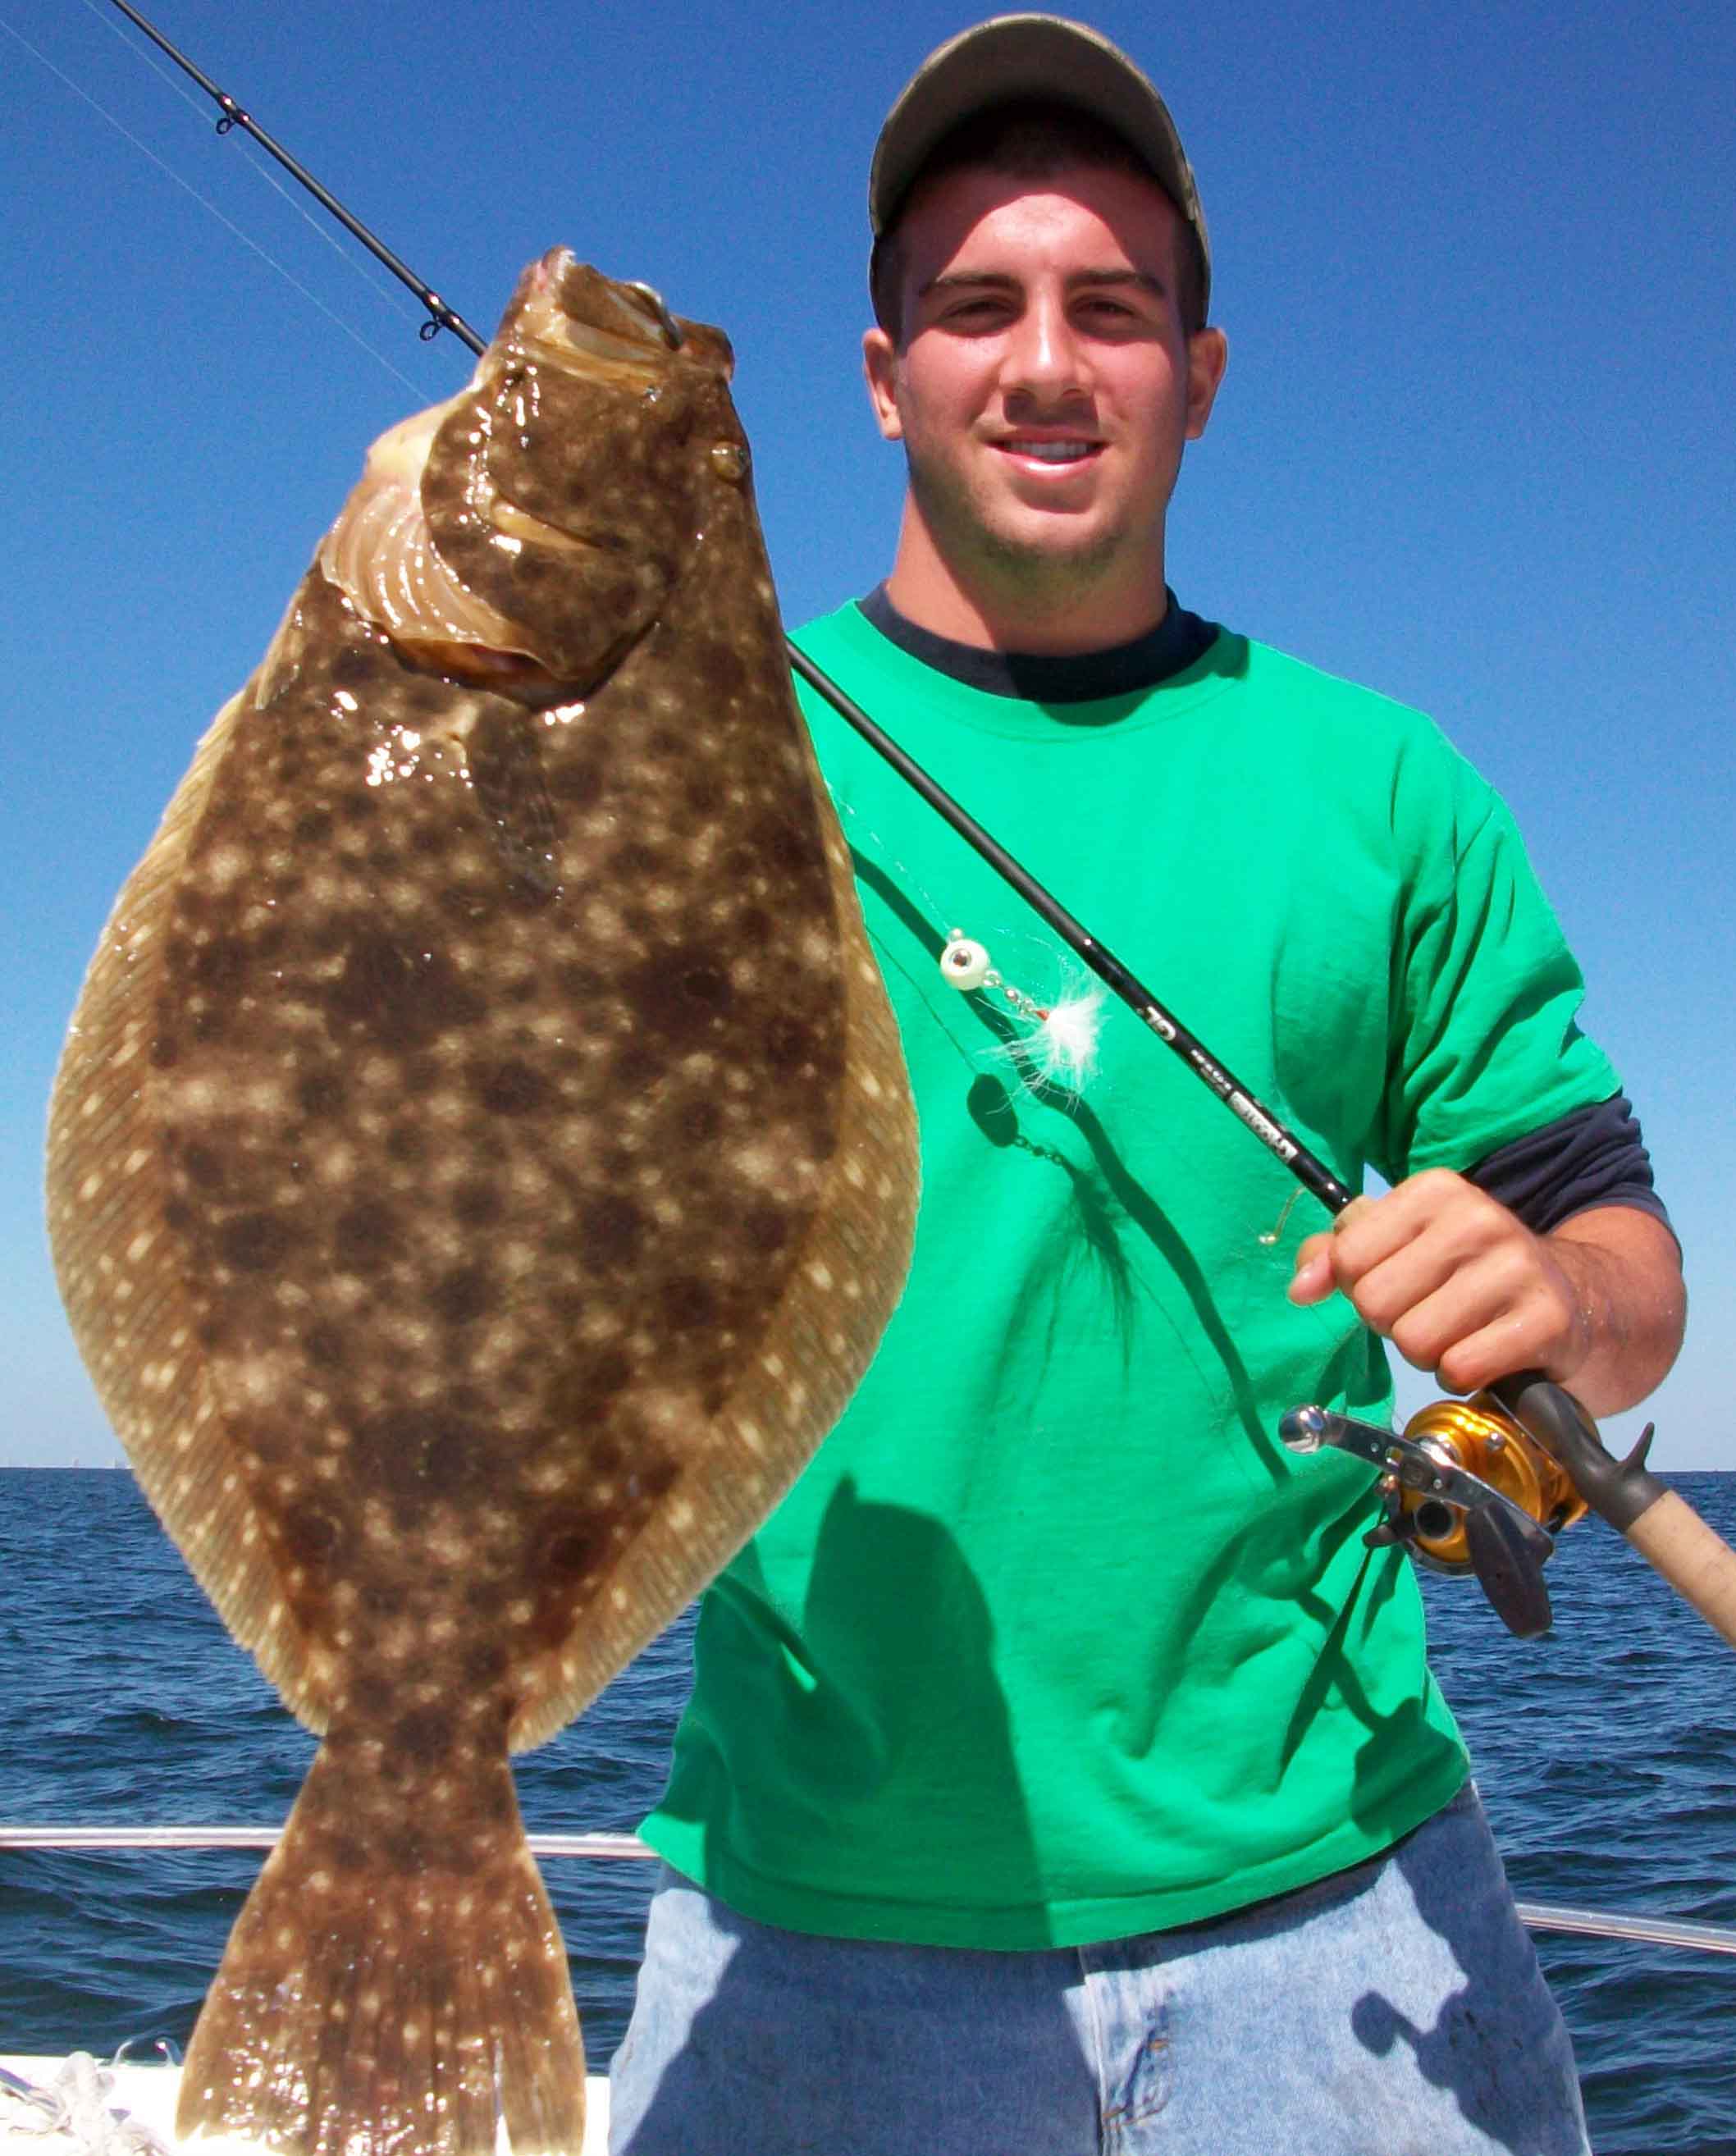 Atlantic city fluke fishing, striper fishing, flounder fishing, striped bass fishing charters where you catch the monster fish!  Brigantine, Ventnor, Margate and South Jersey accessible fishing charters!